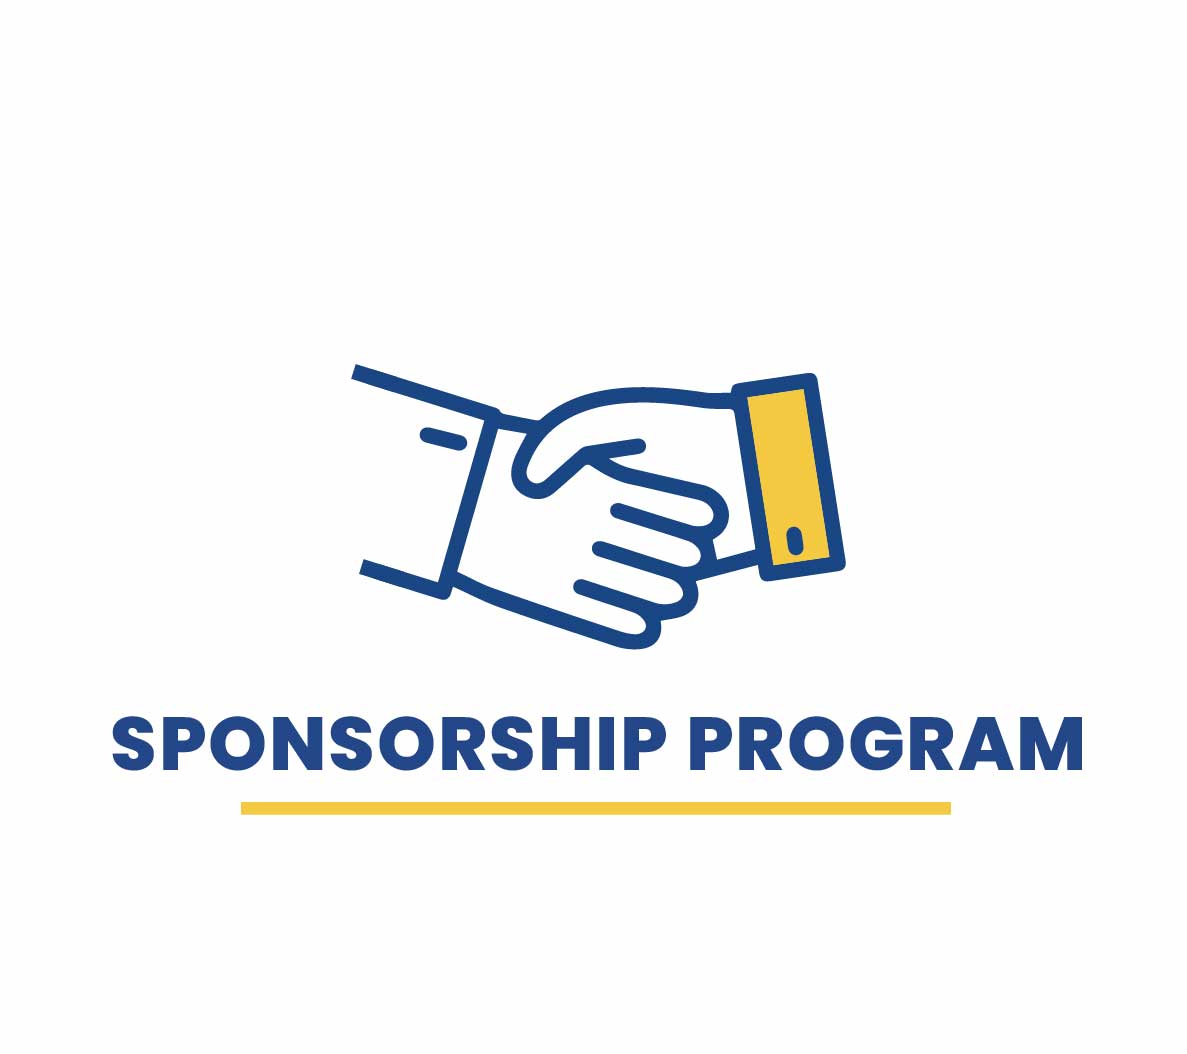 Click here to request sponsorship program